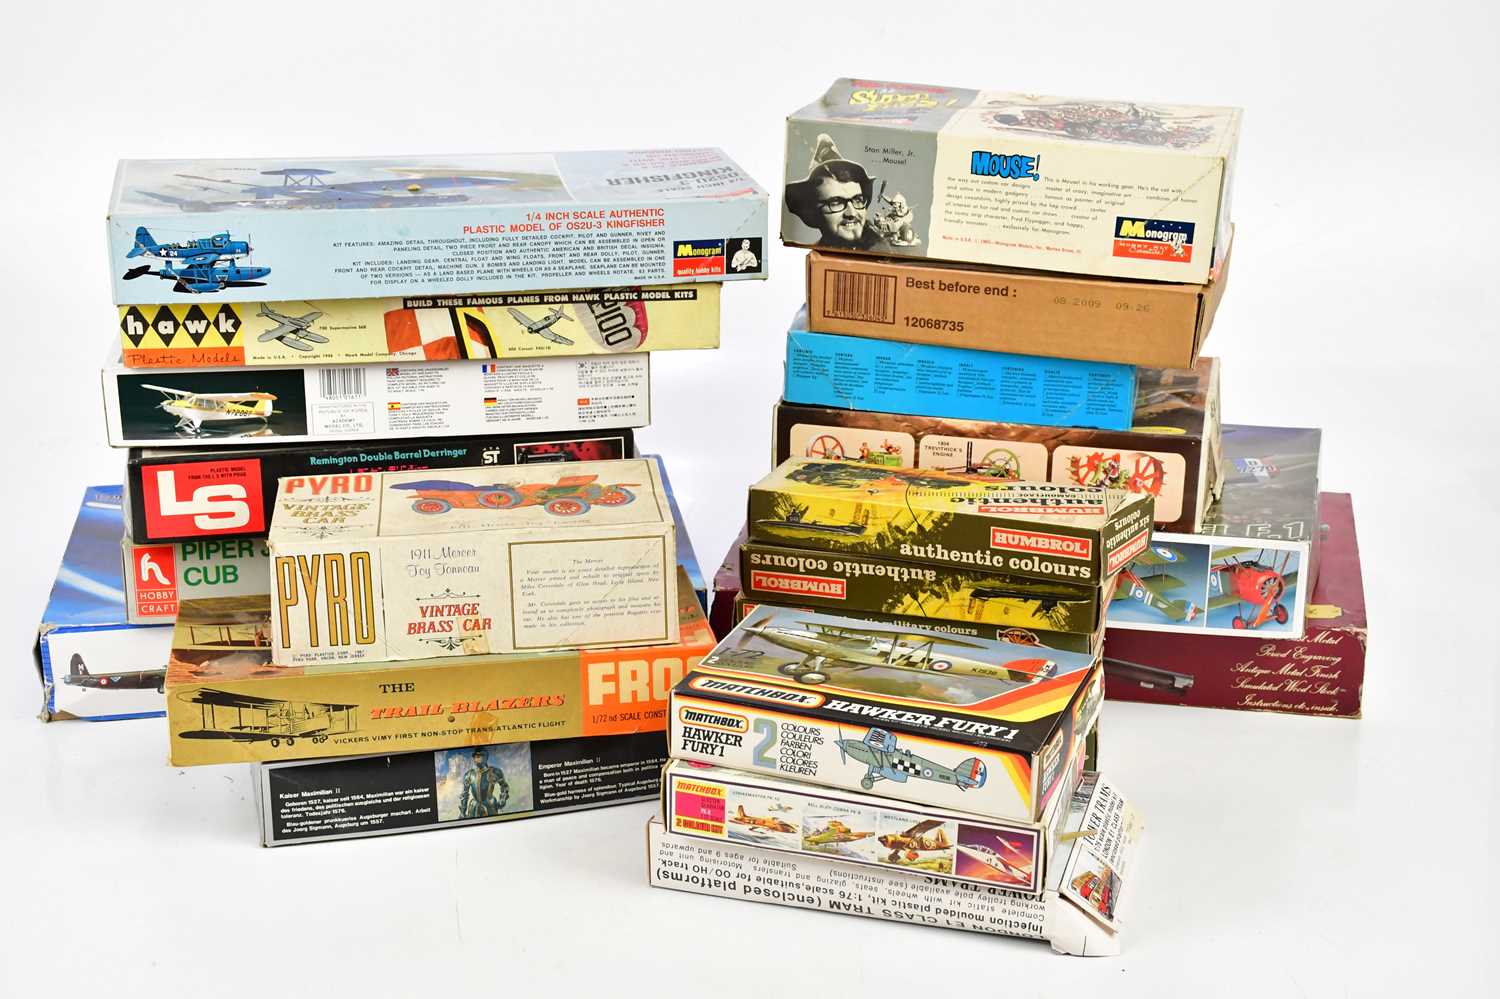 A collection of assorted model kits including a Frog Vickers Vimy, Sopwith Camel F.1, etc.